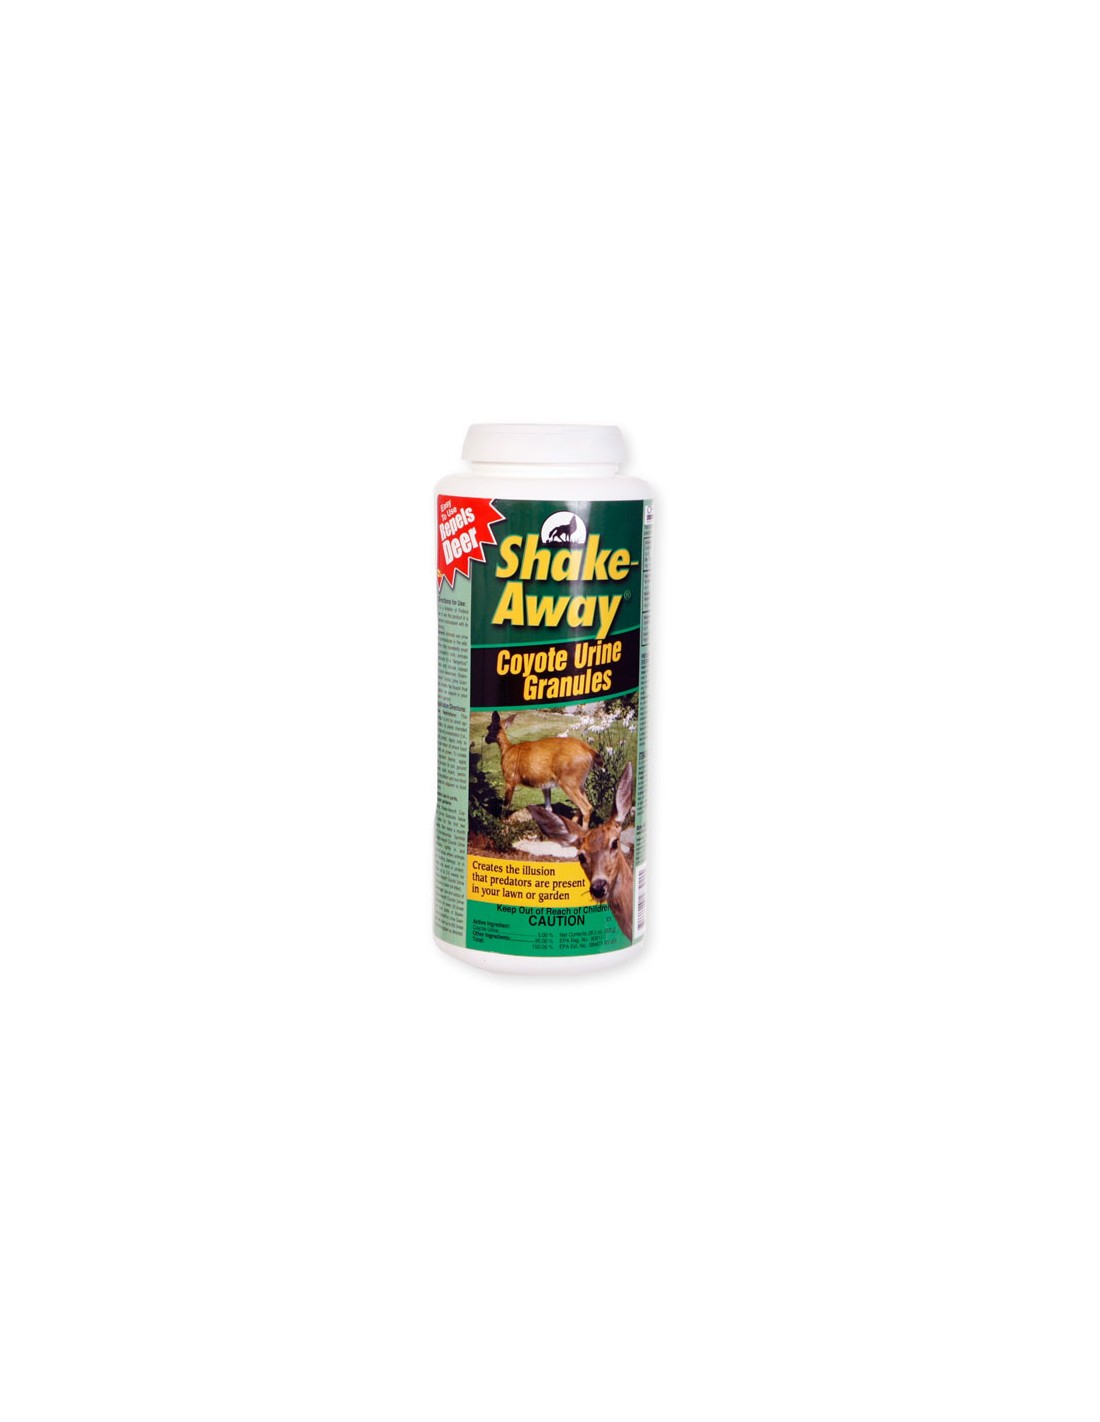 Shake Away Coyote Urine Granules Questions & Answers